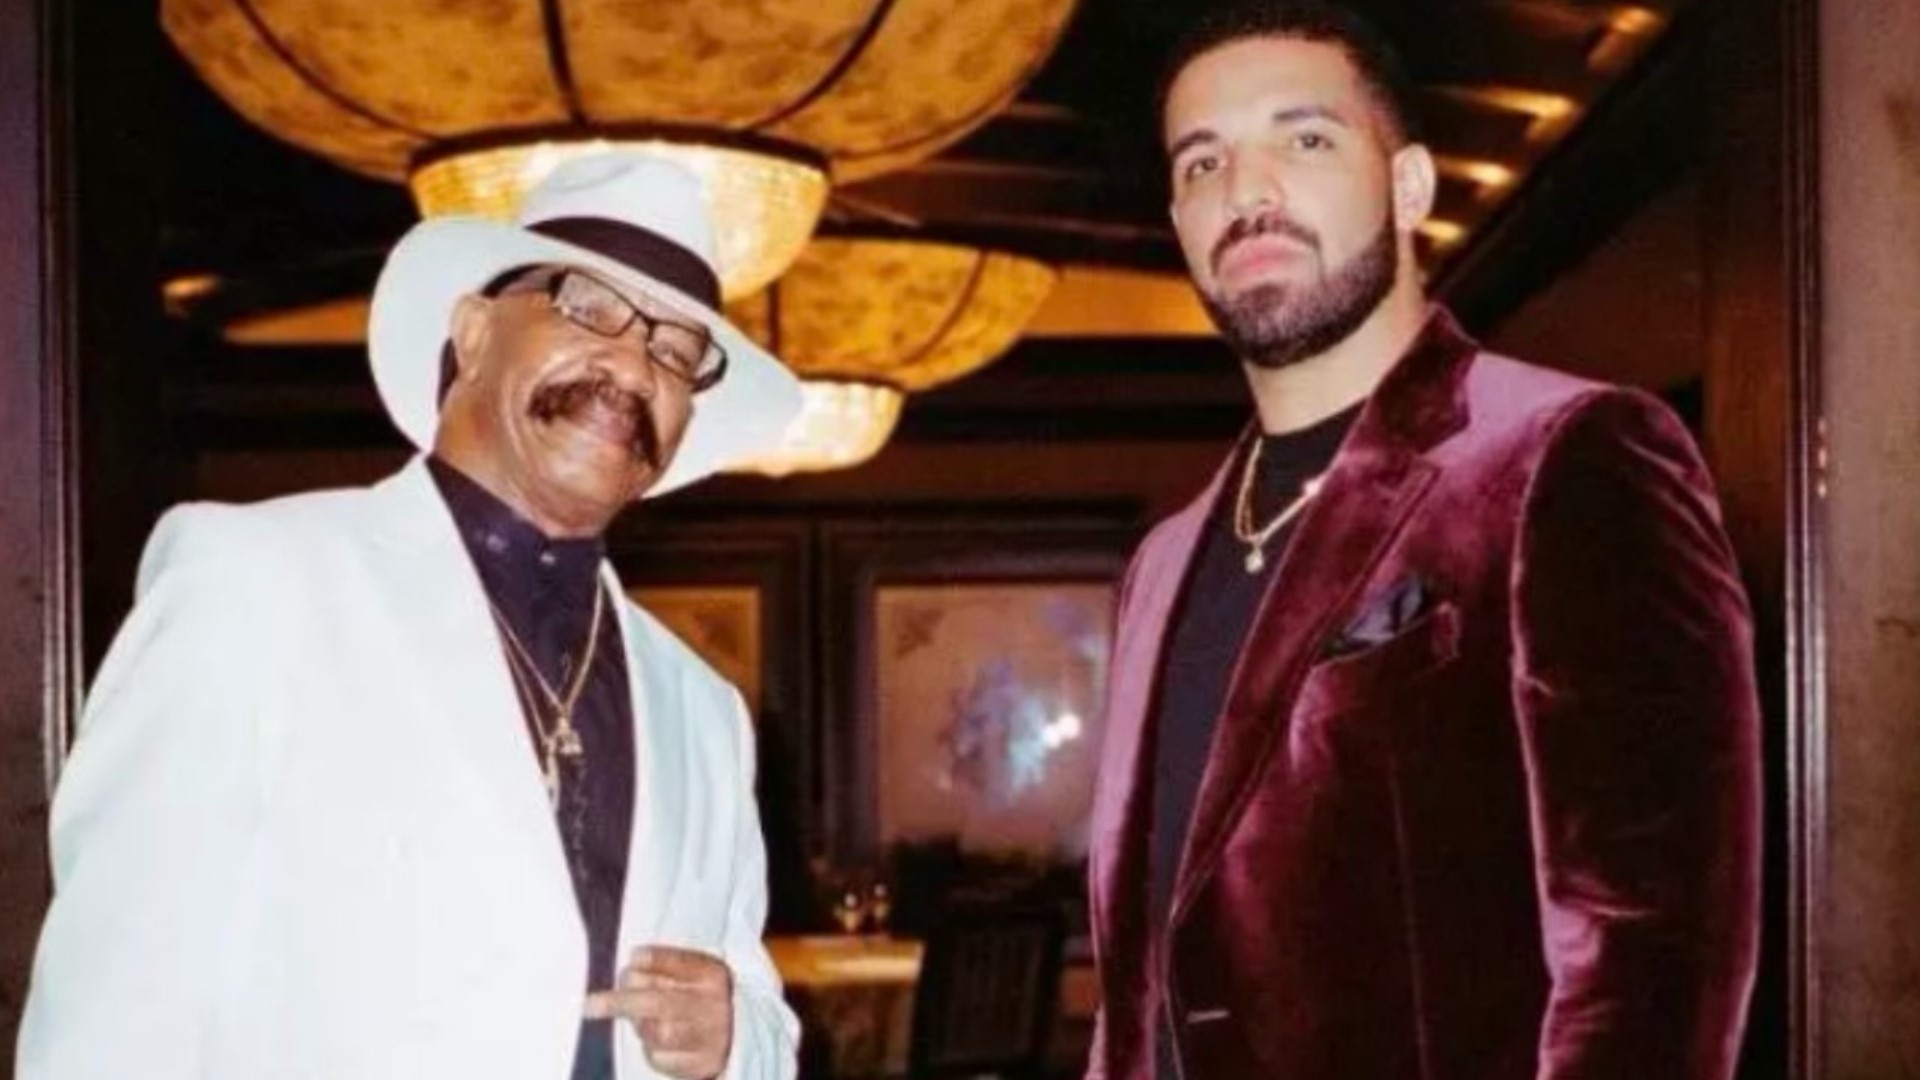 ABC24 recently sat down with Drake’s dad, Dennis Graham. He says it’s no accident his son is opening his tour in Memphis.